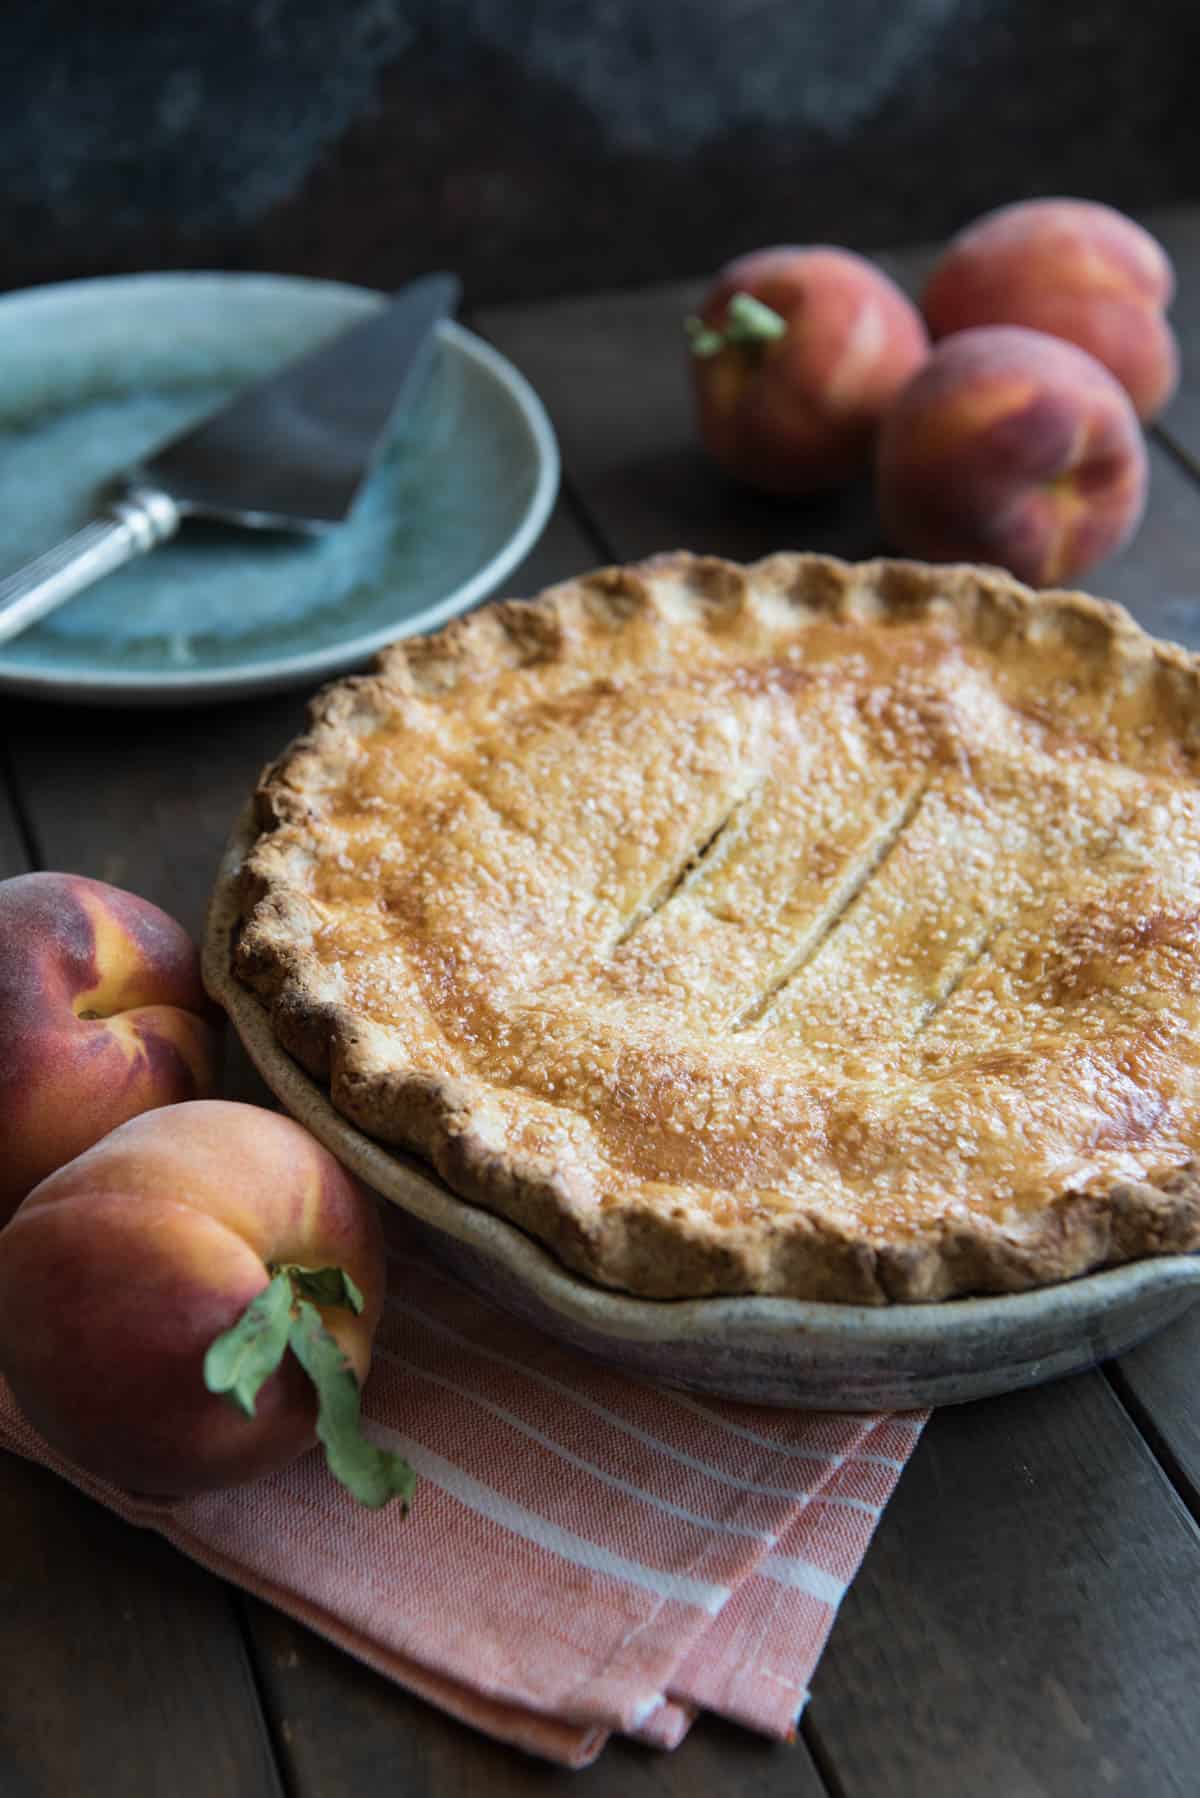 A Southern Peach Pie in a pie plate next to fresh whole peaches.